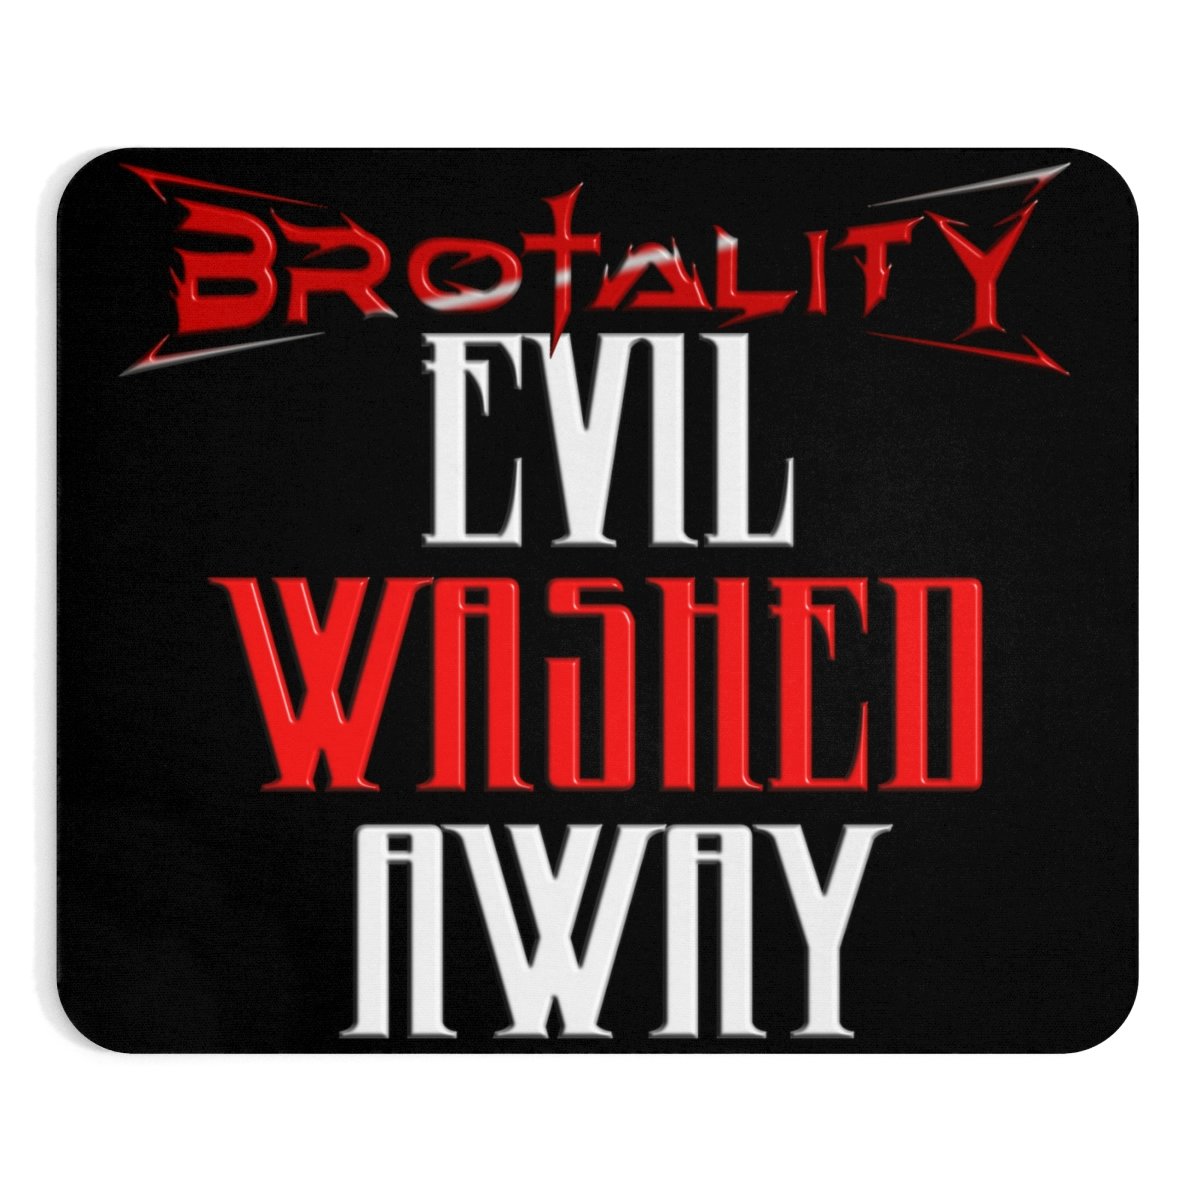 Brotality Evil Washed Away Mouse Pad